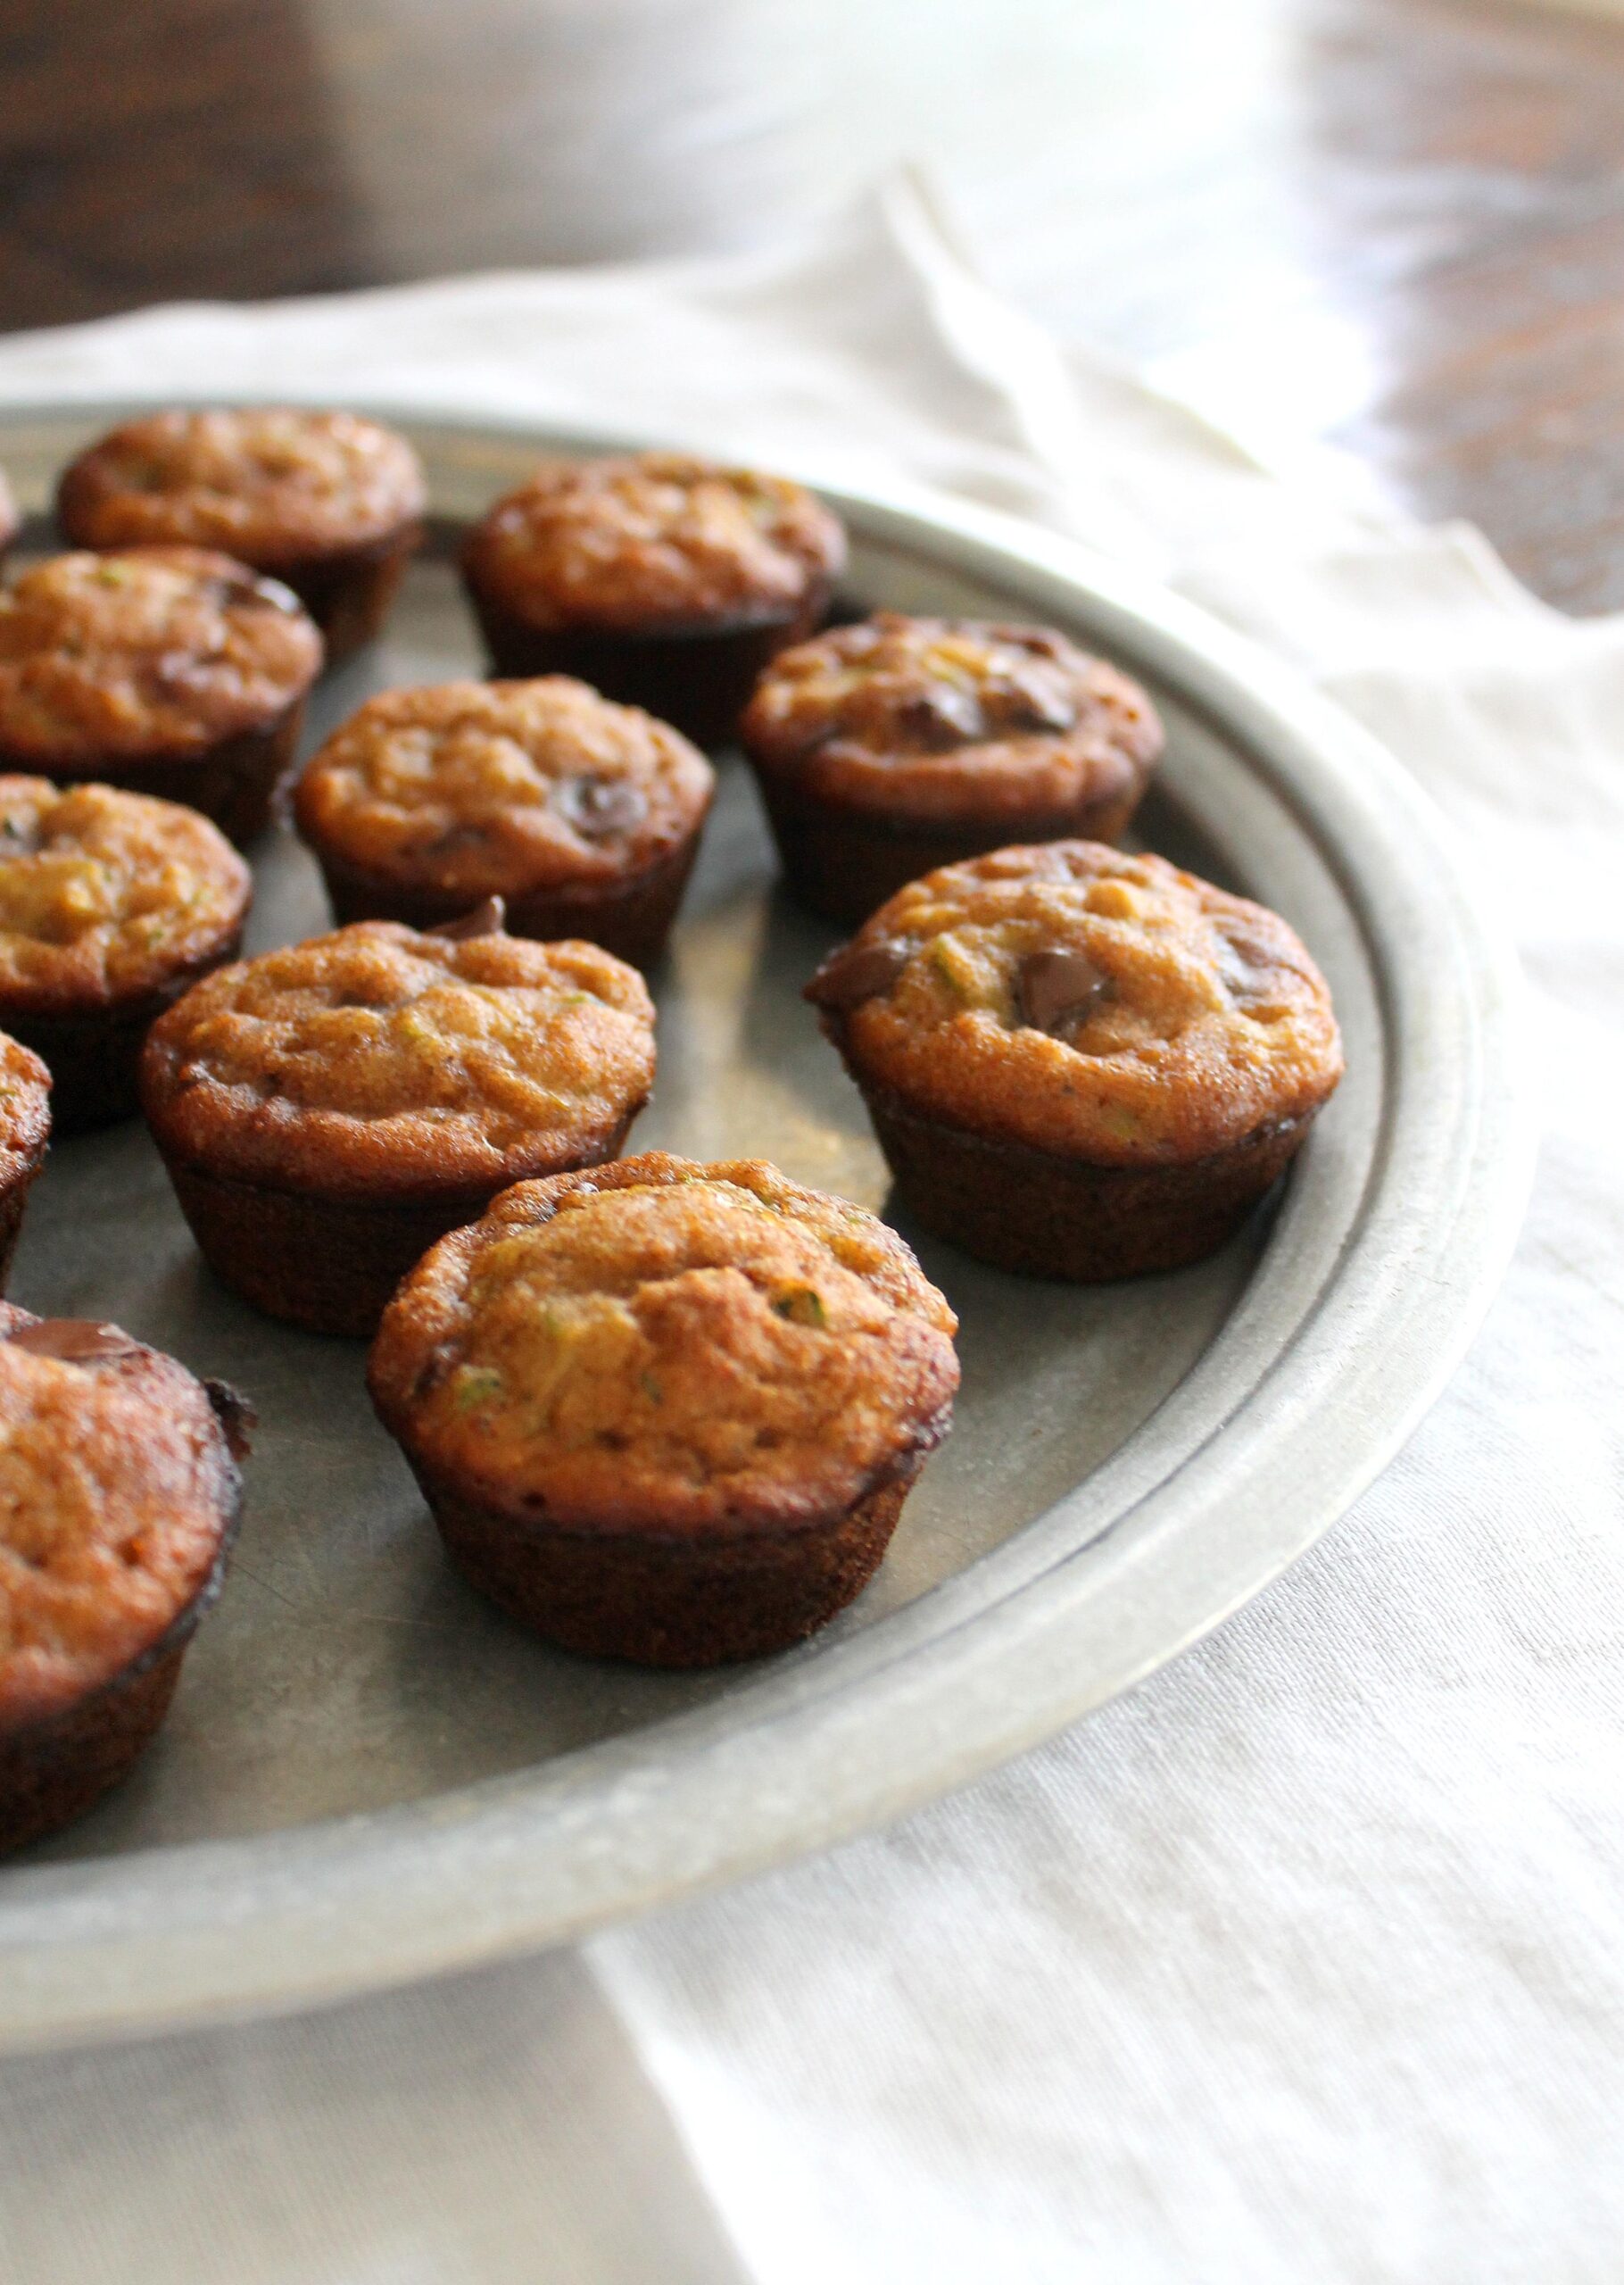  These mini-muffins are going to be your new favorite snack!